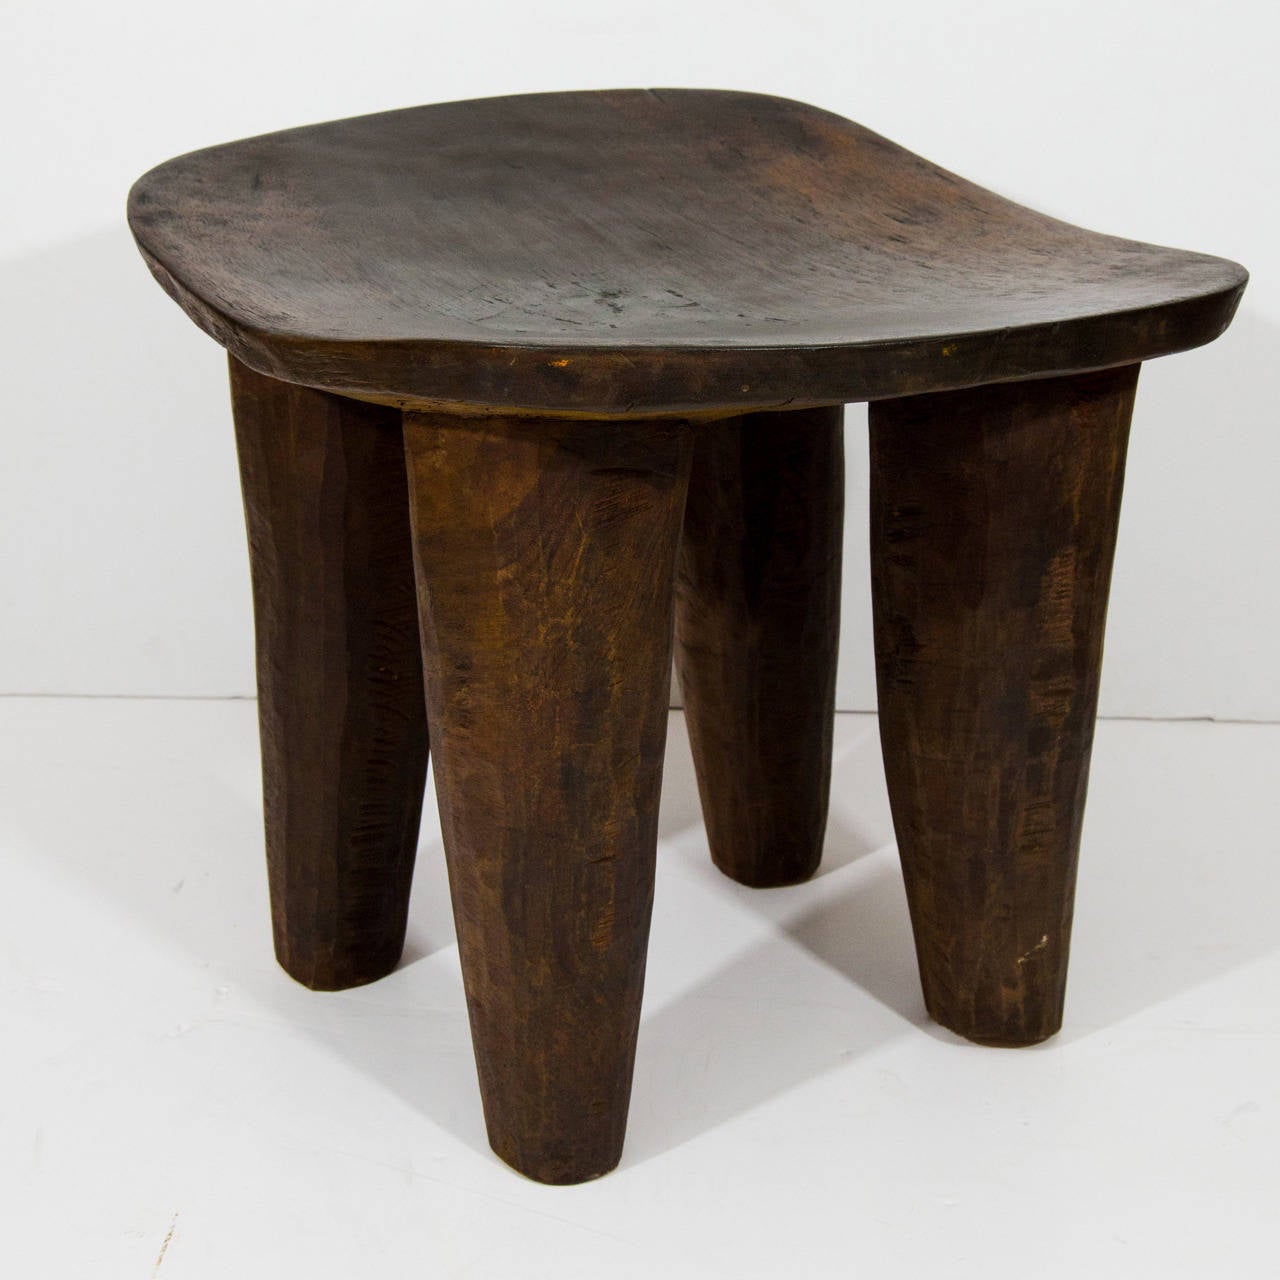 Hand-carved stools made from one solid piece of wood.